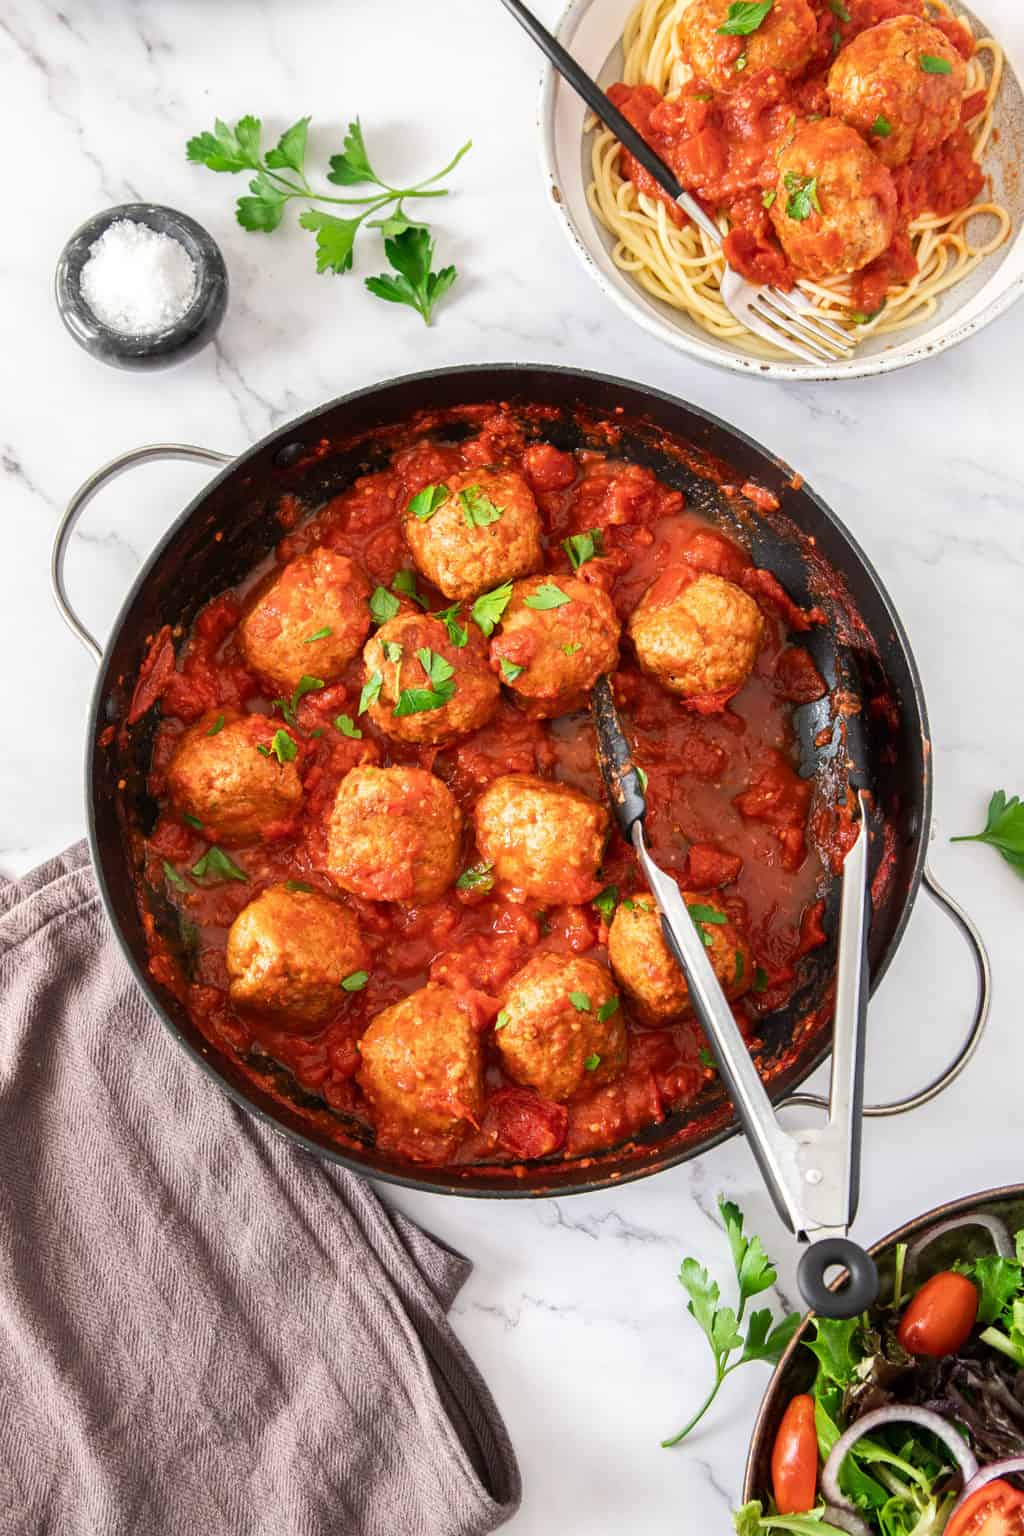 An overhead shot of a large black skillet of turkey meatballs. Next to the skillet is a small white bowl of pasta with meatballs